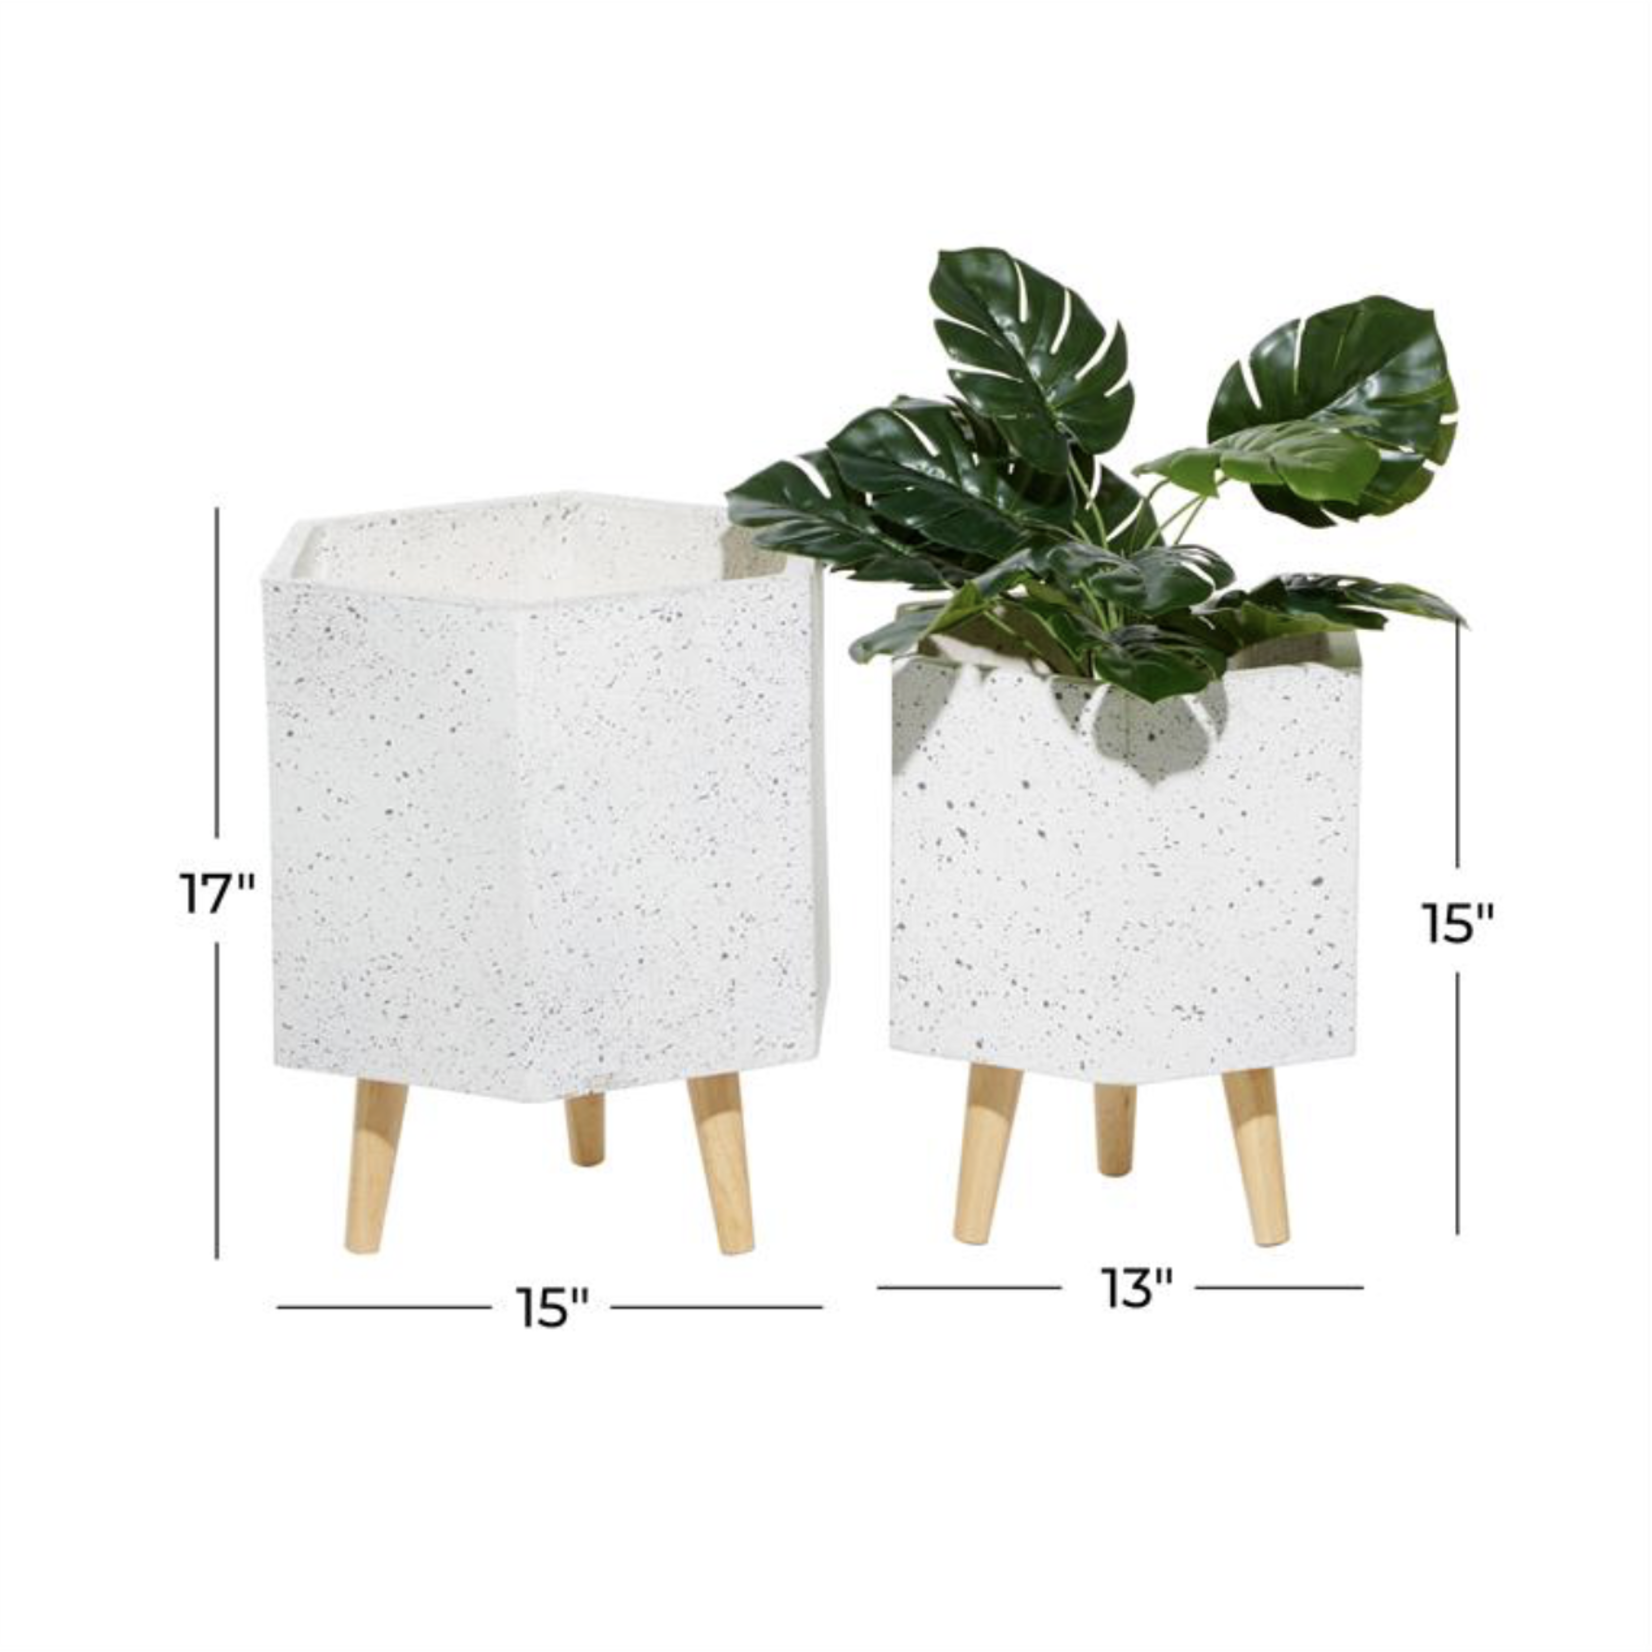 15”H X 13” X 11” SMALL WHITE HEXAGON MAGNESIUM OXIDE CONTEMPORARY PLANTER(NOT WATER TIGHT)